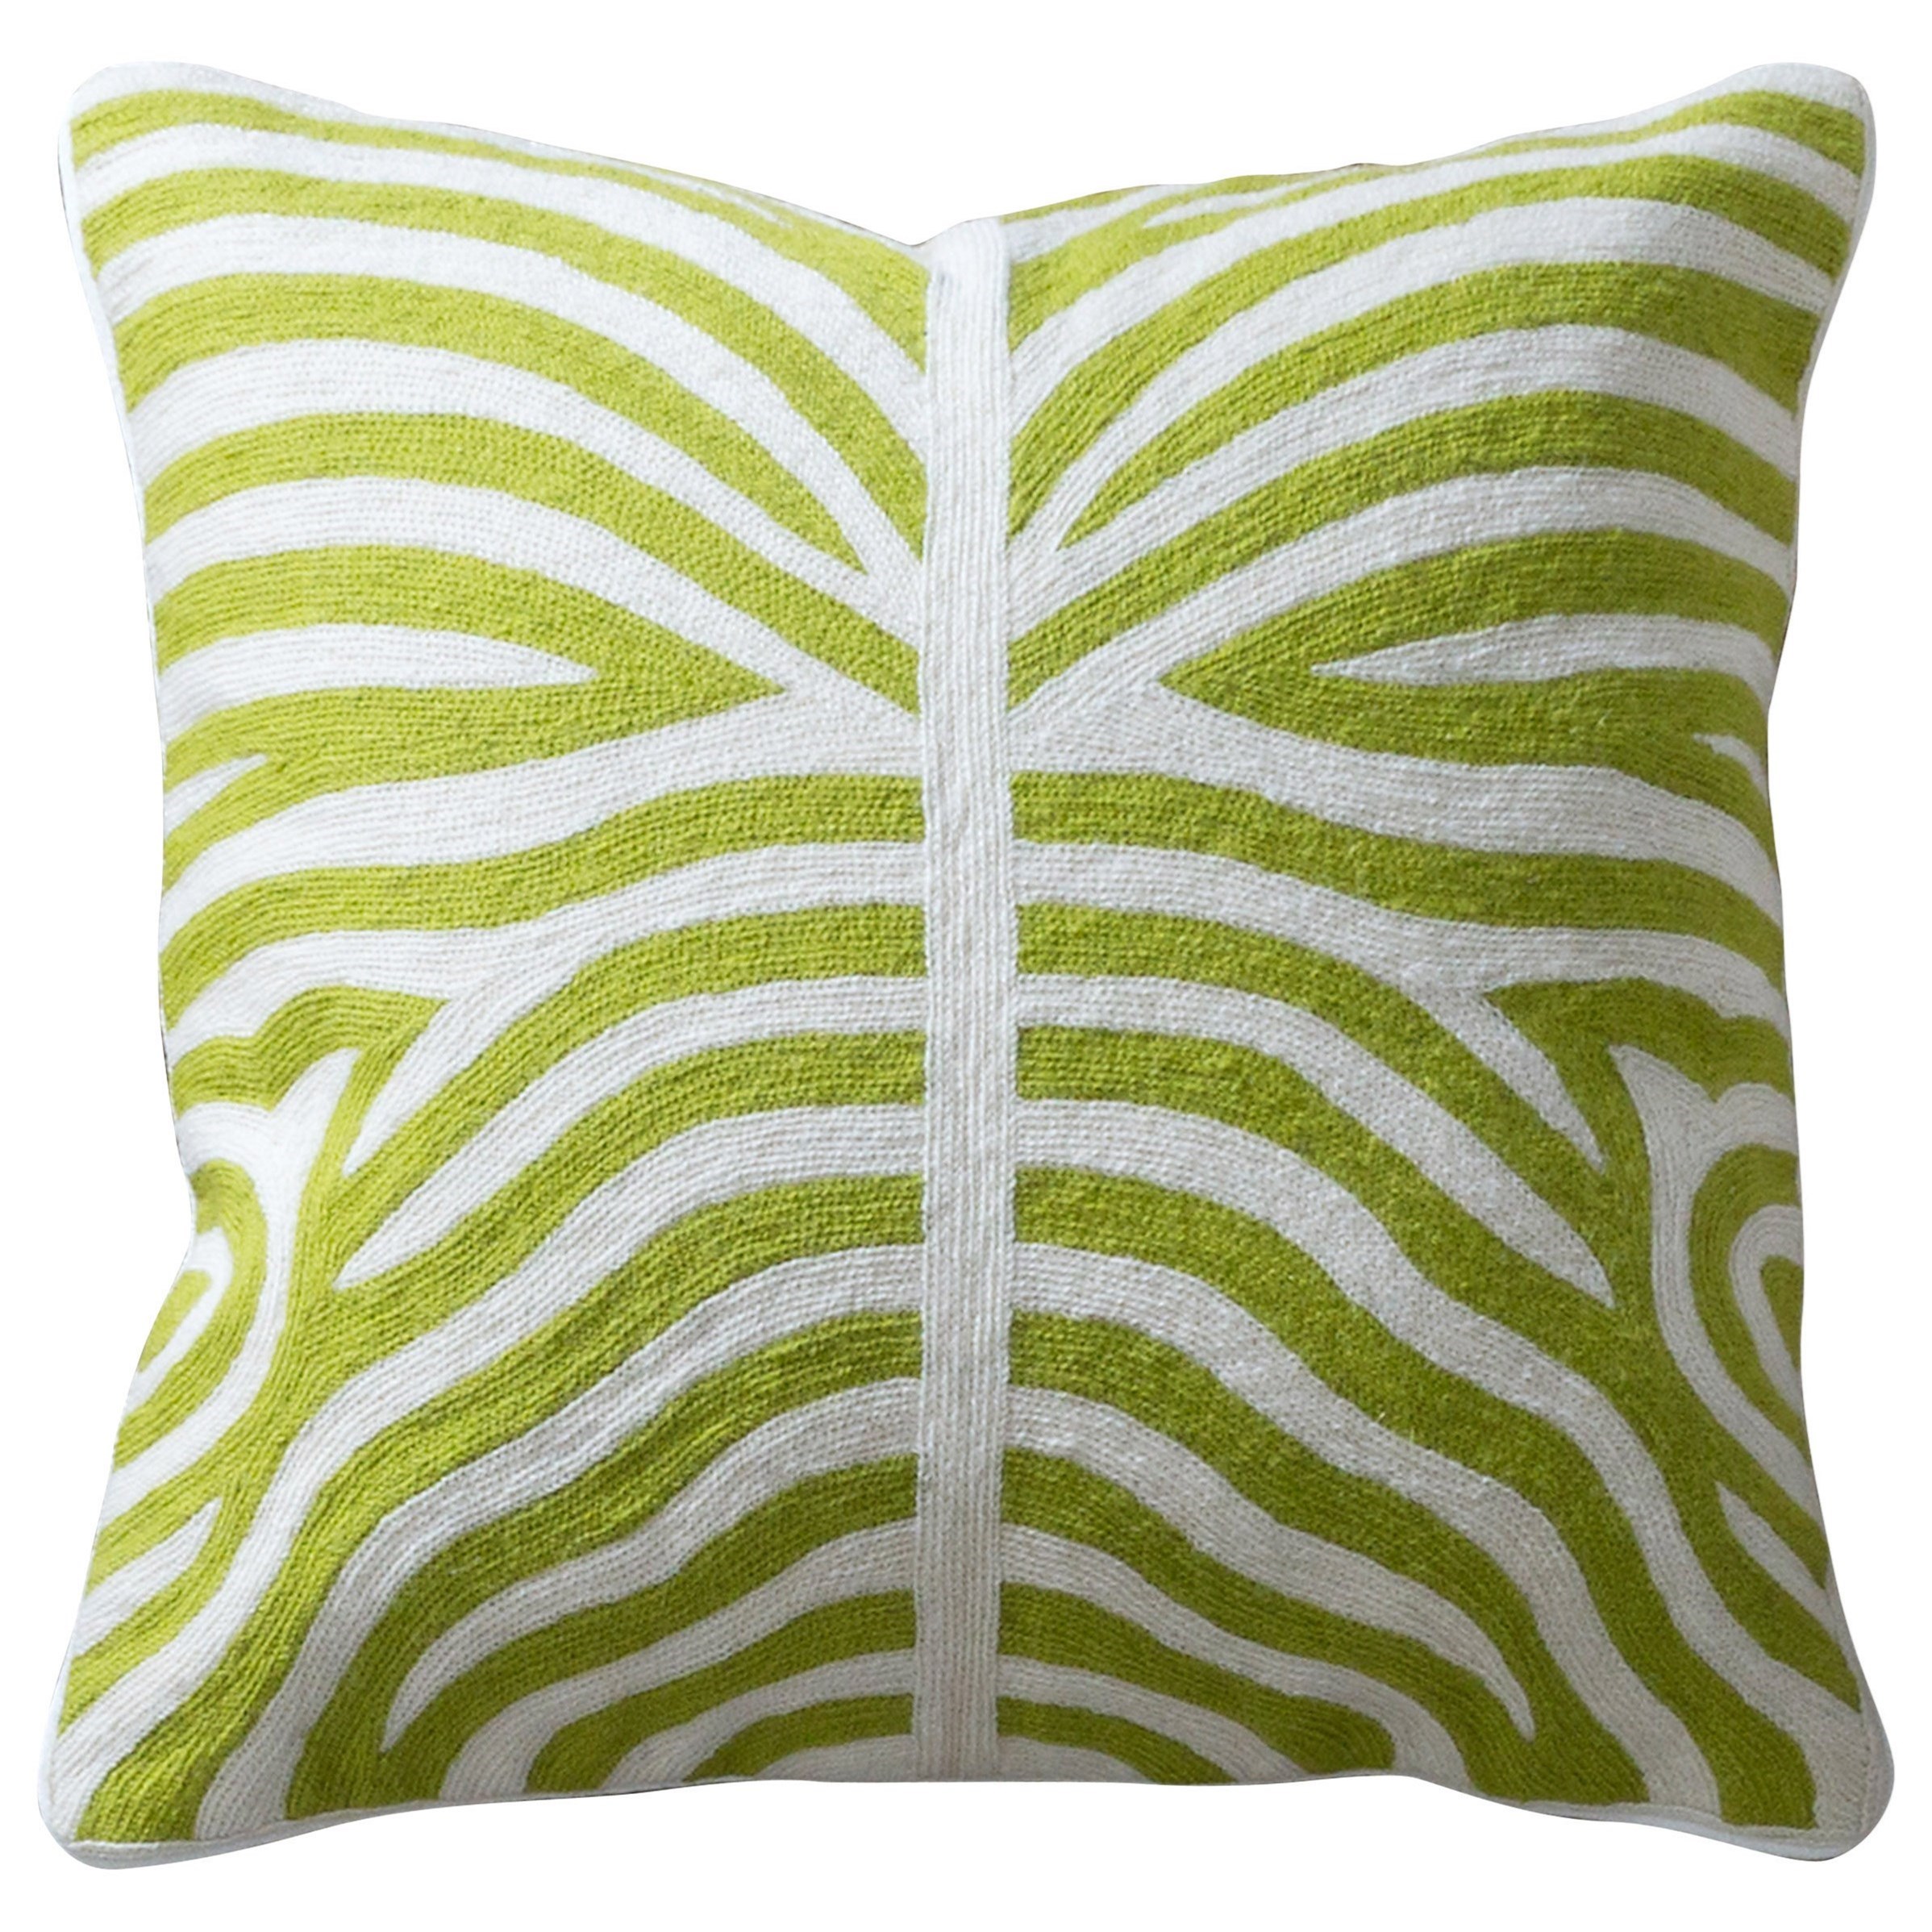 Green and White Zebra-Patterned Accent Pillow